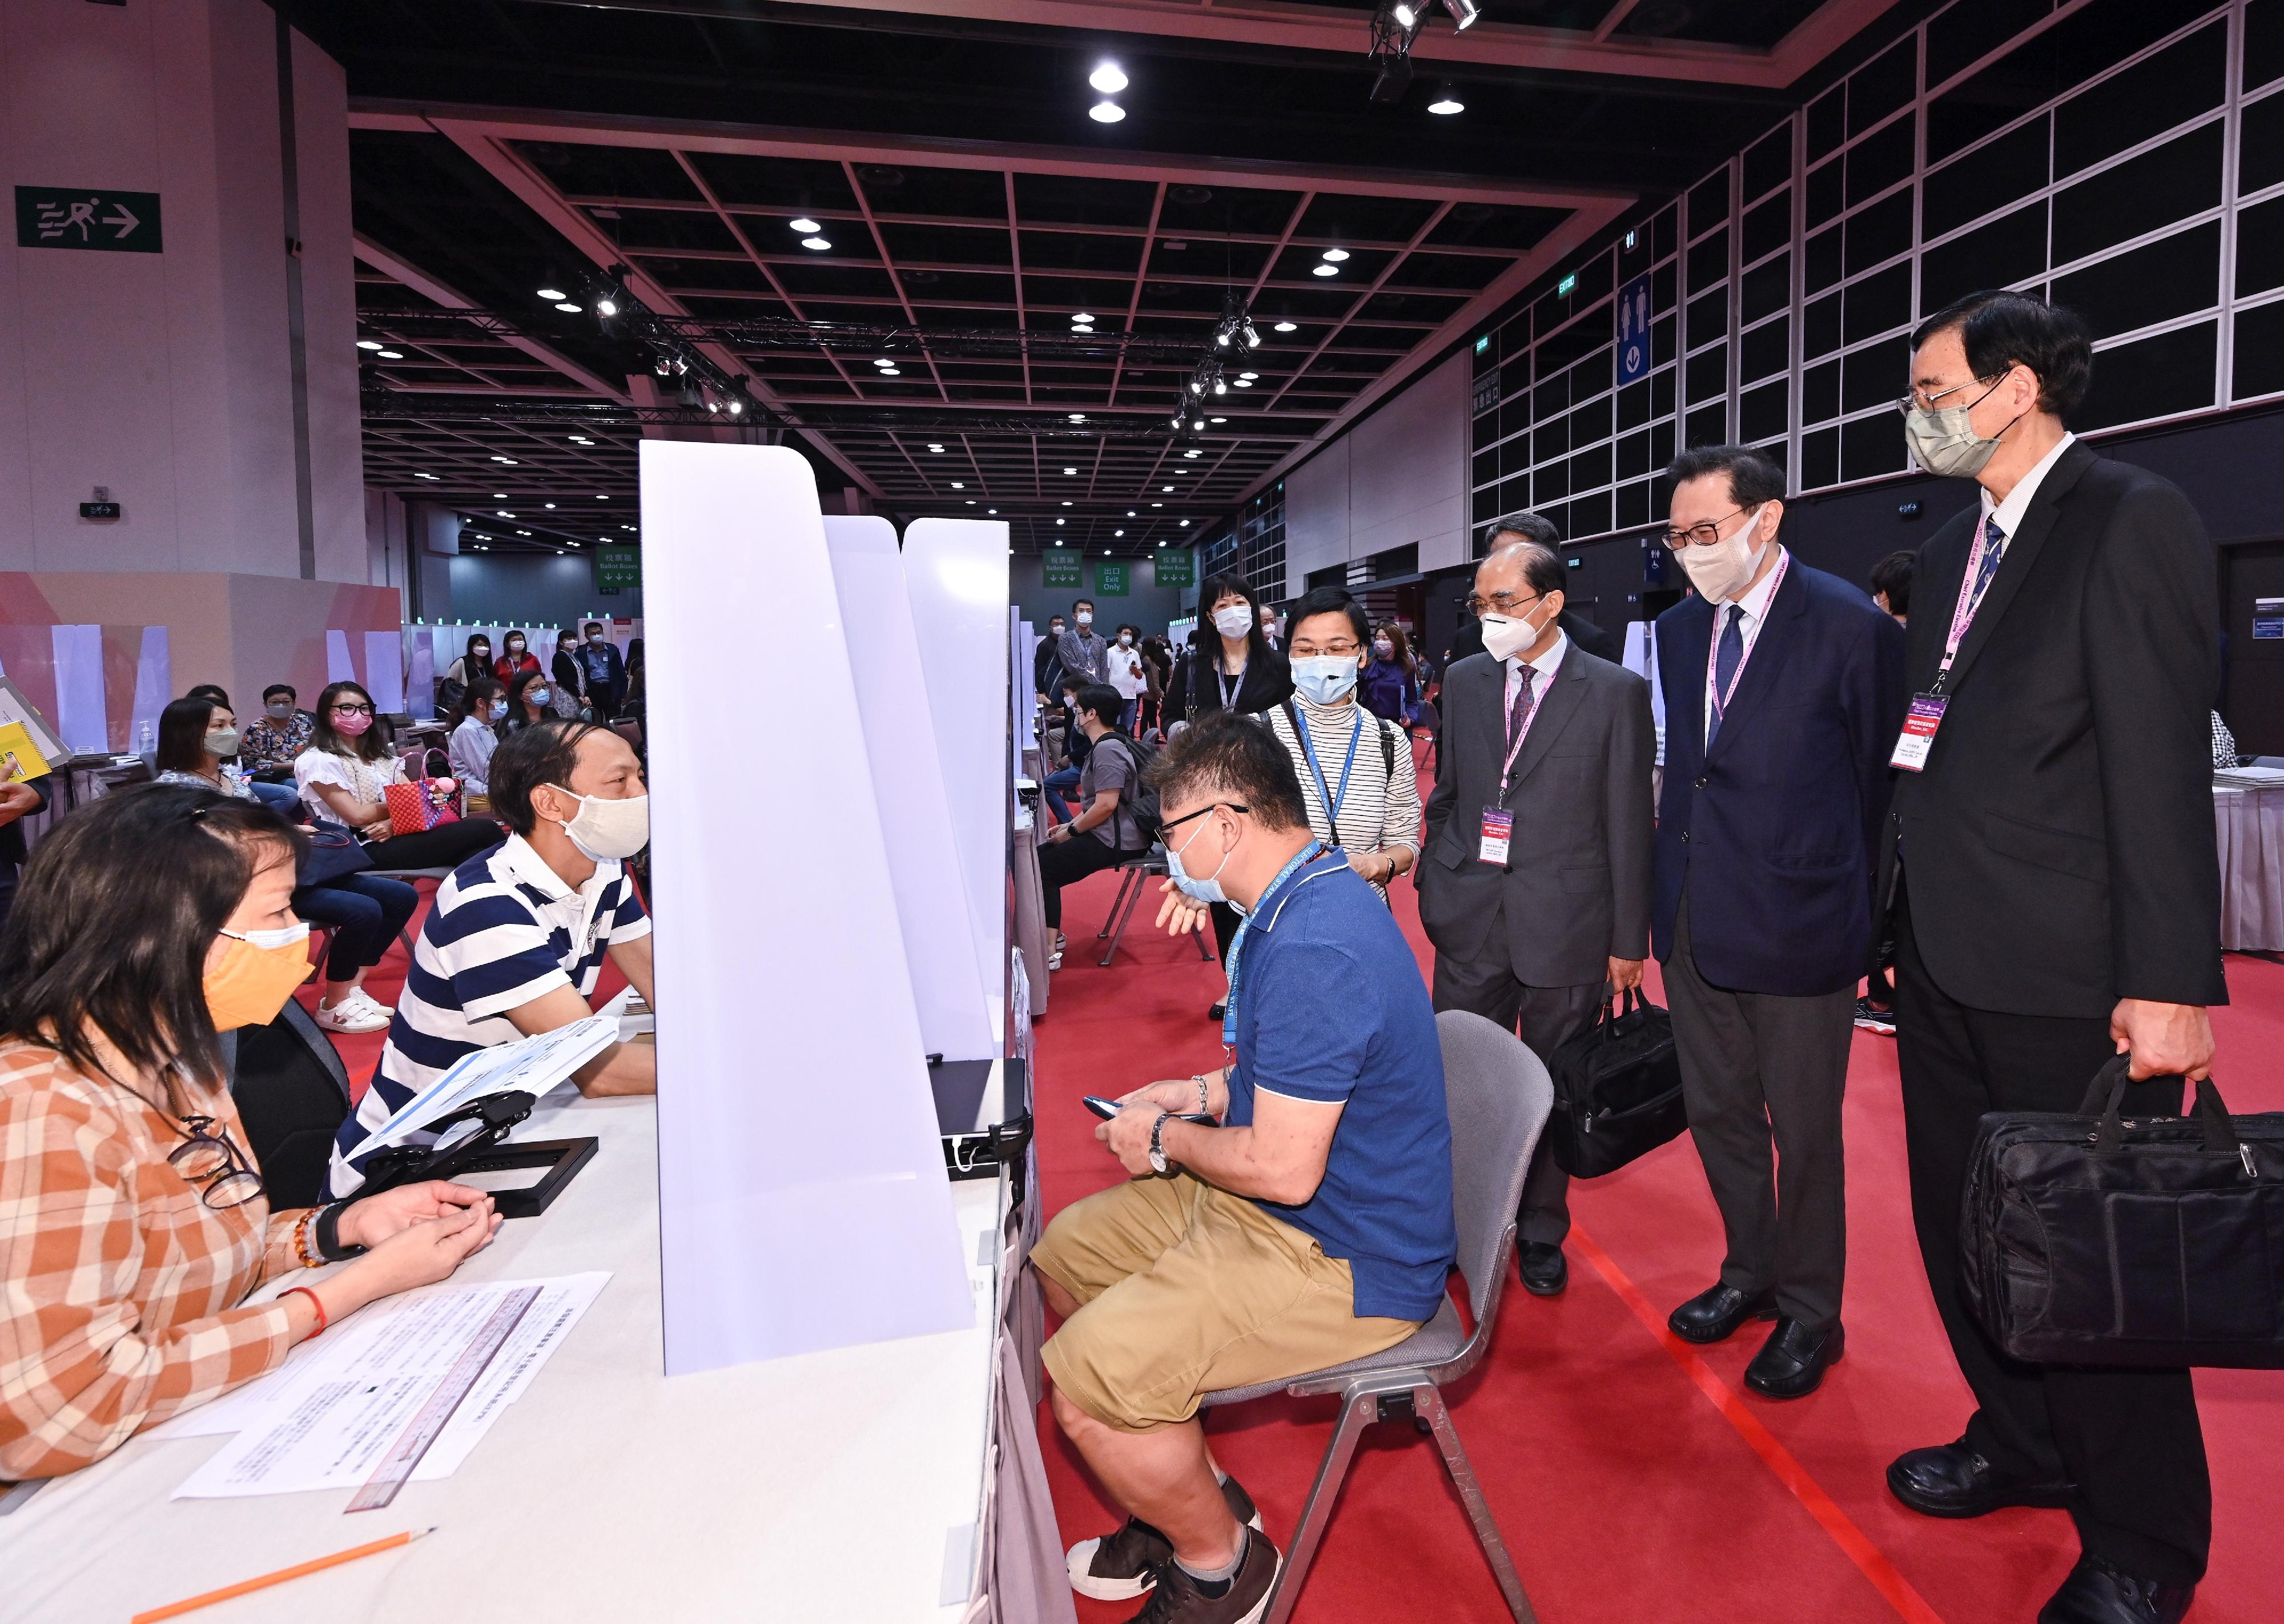 The Chairman of the Electoral Affairs Commission (EAC), Mr Justice Barnabas Fung Wah (second right), EAC members Mr Arthur Luk, SC (third right), and Professor Daniel Shek (first right), today (May 4) visited the main polling station of the 2022 Chief Executive Election at the Hong Kong Convention and Exhibition Centre in Wan Chai and inspected the training with practical sessions and simulated activities for staff. Photo shows polling staff in a simulation of issuing a ballot paper at an issuing desk.